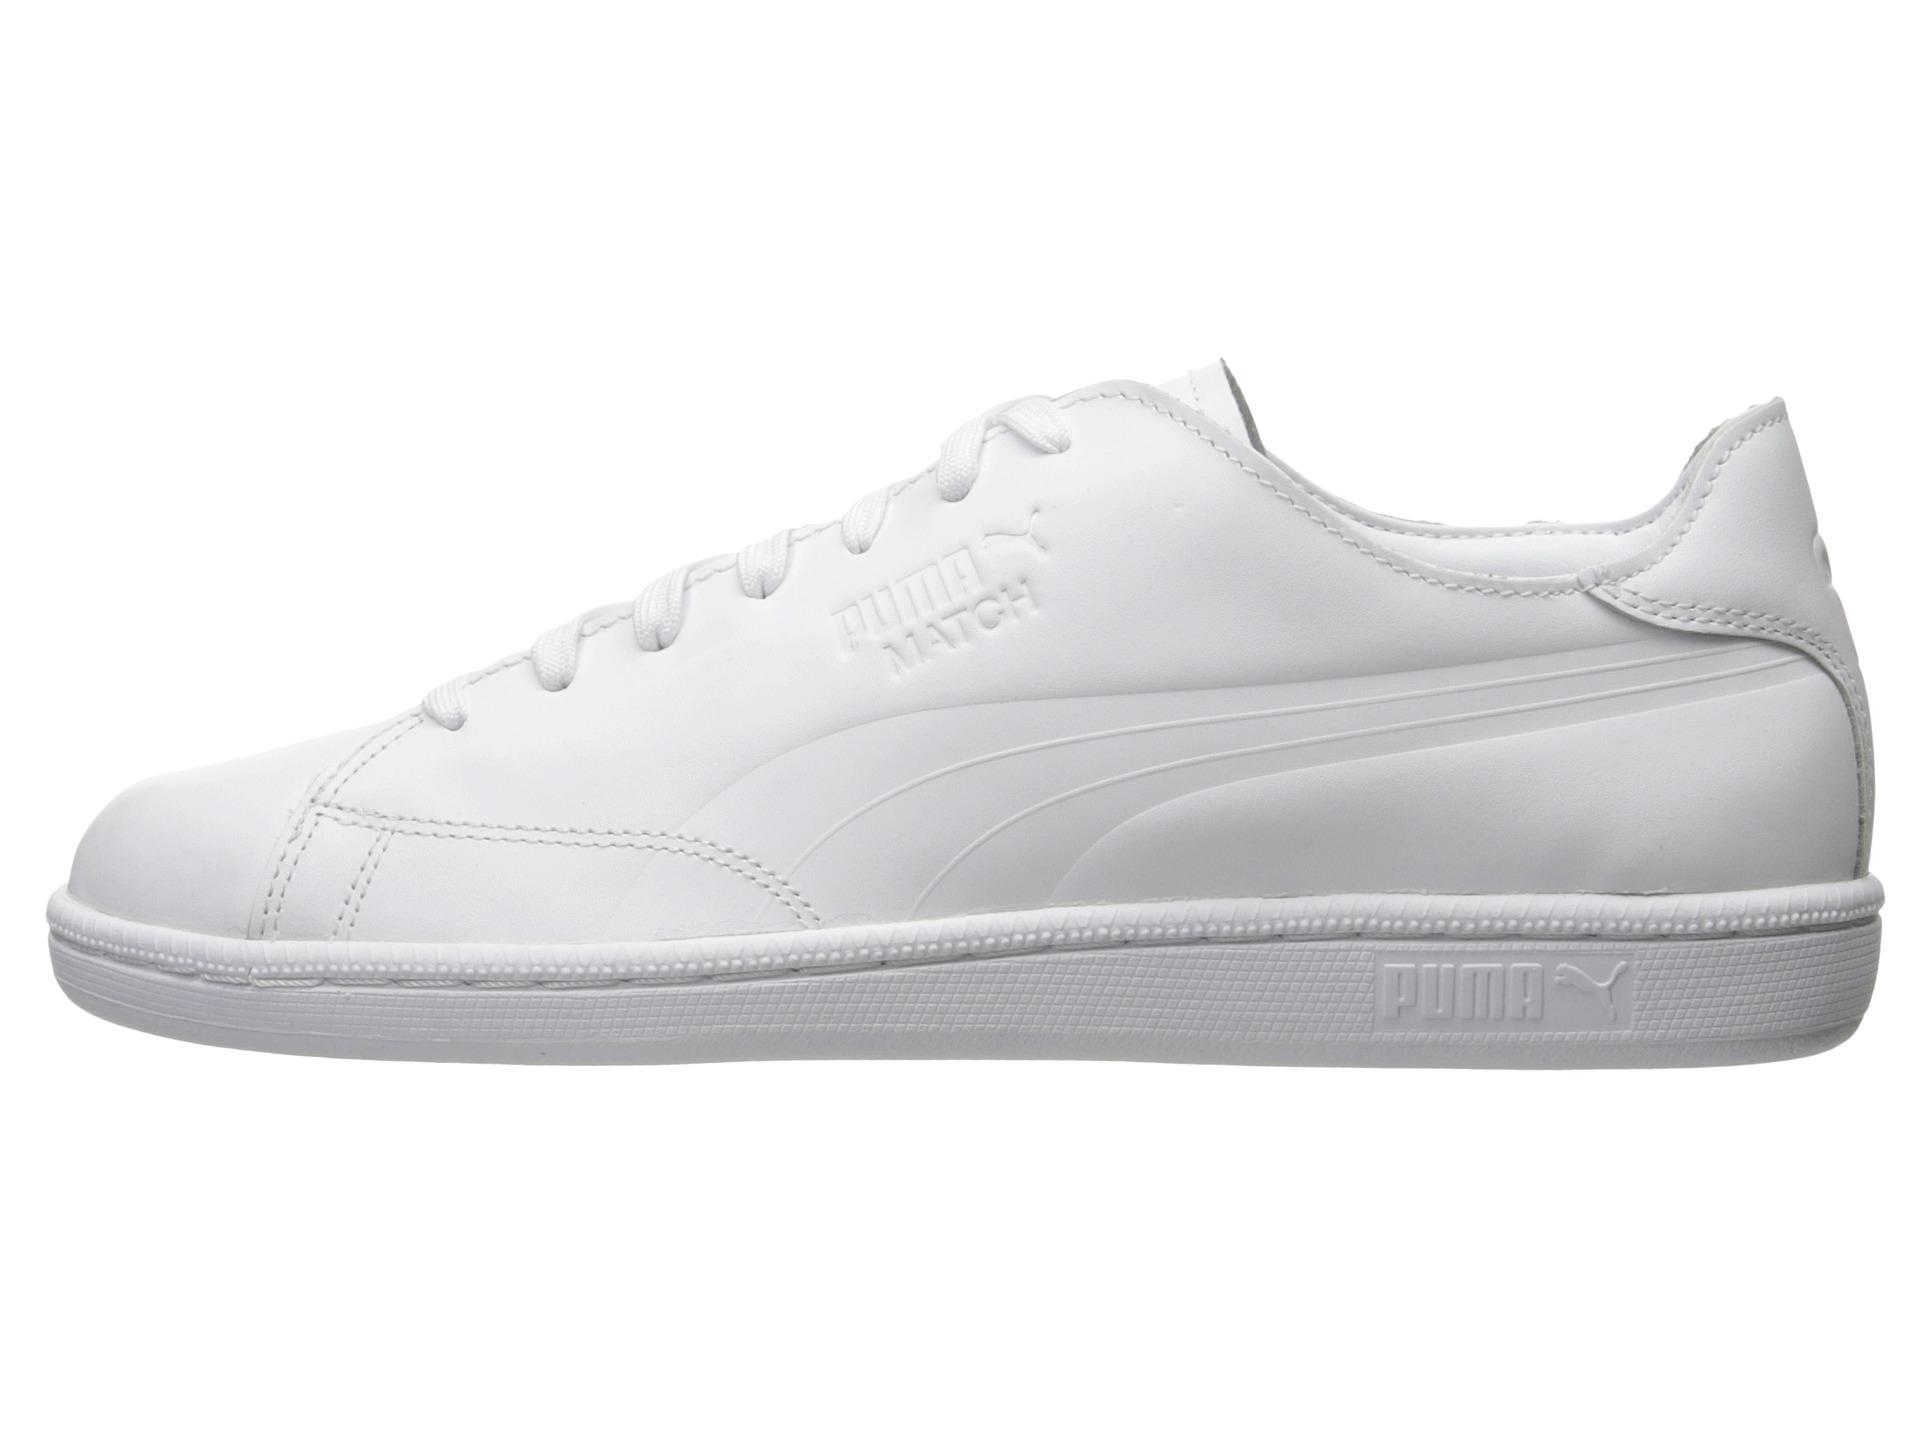 PUMA Leather Match Clean Fashion Sneaker in White for Men - Lyst